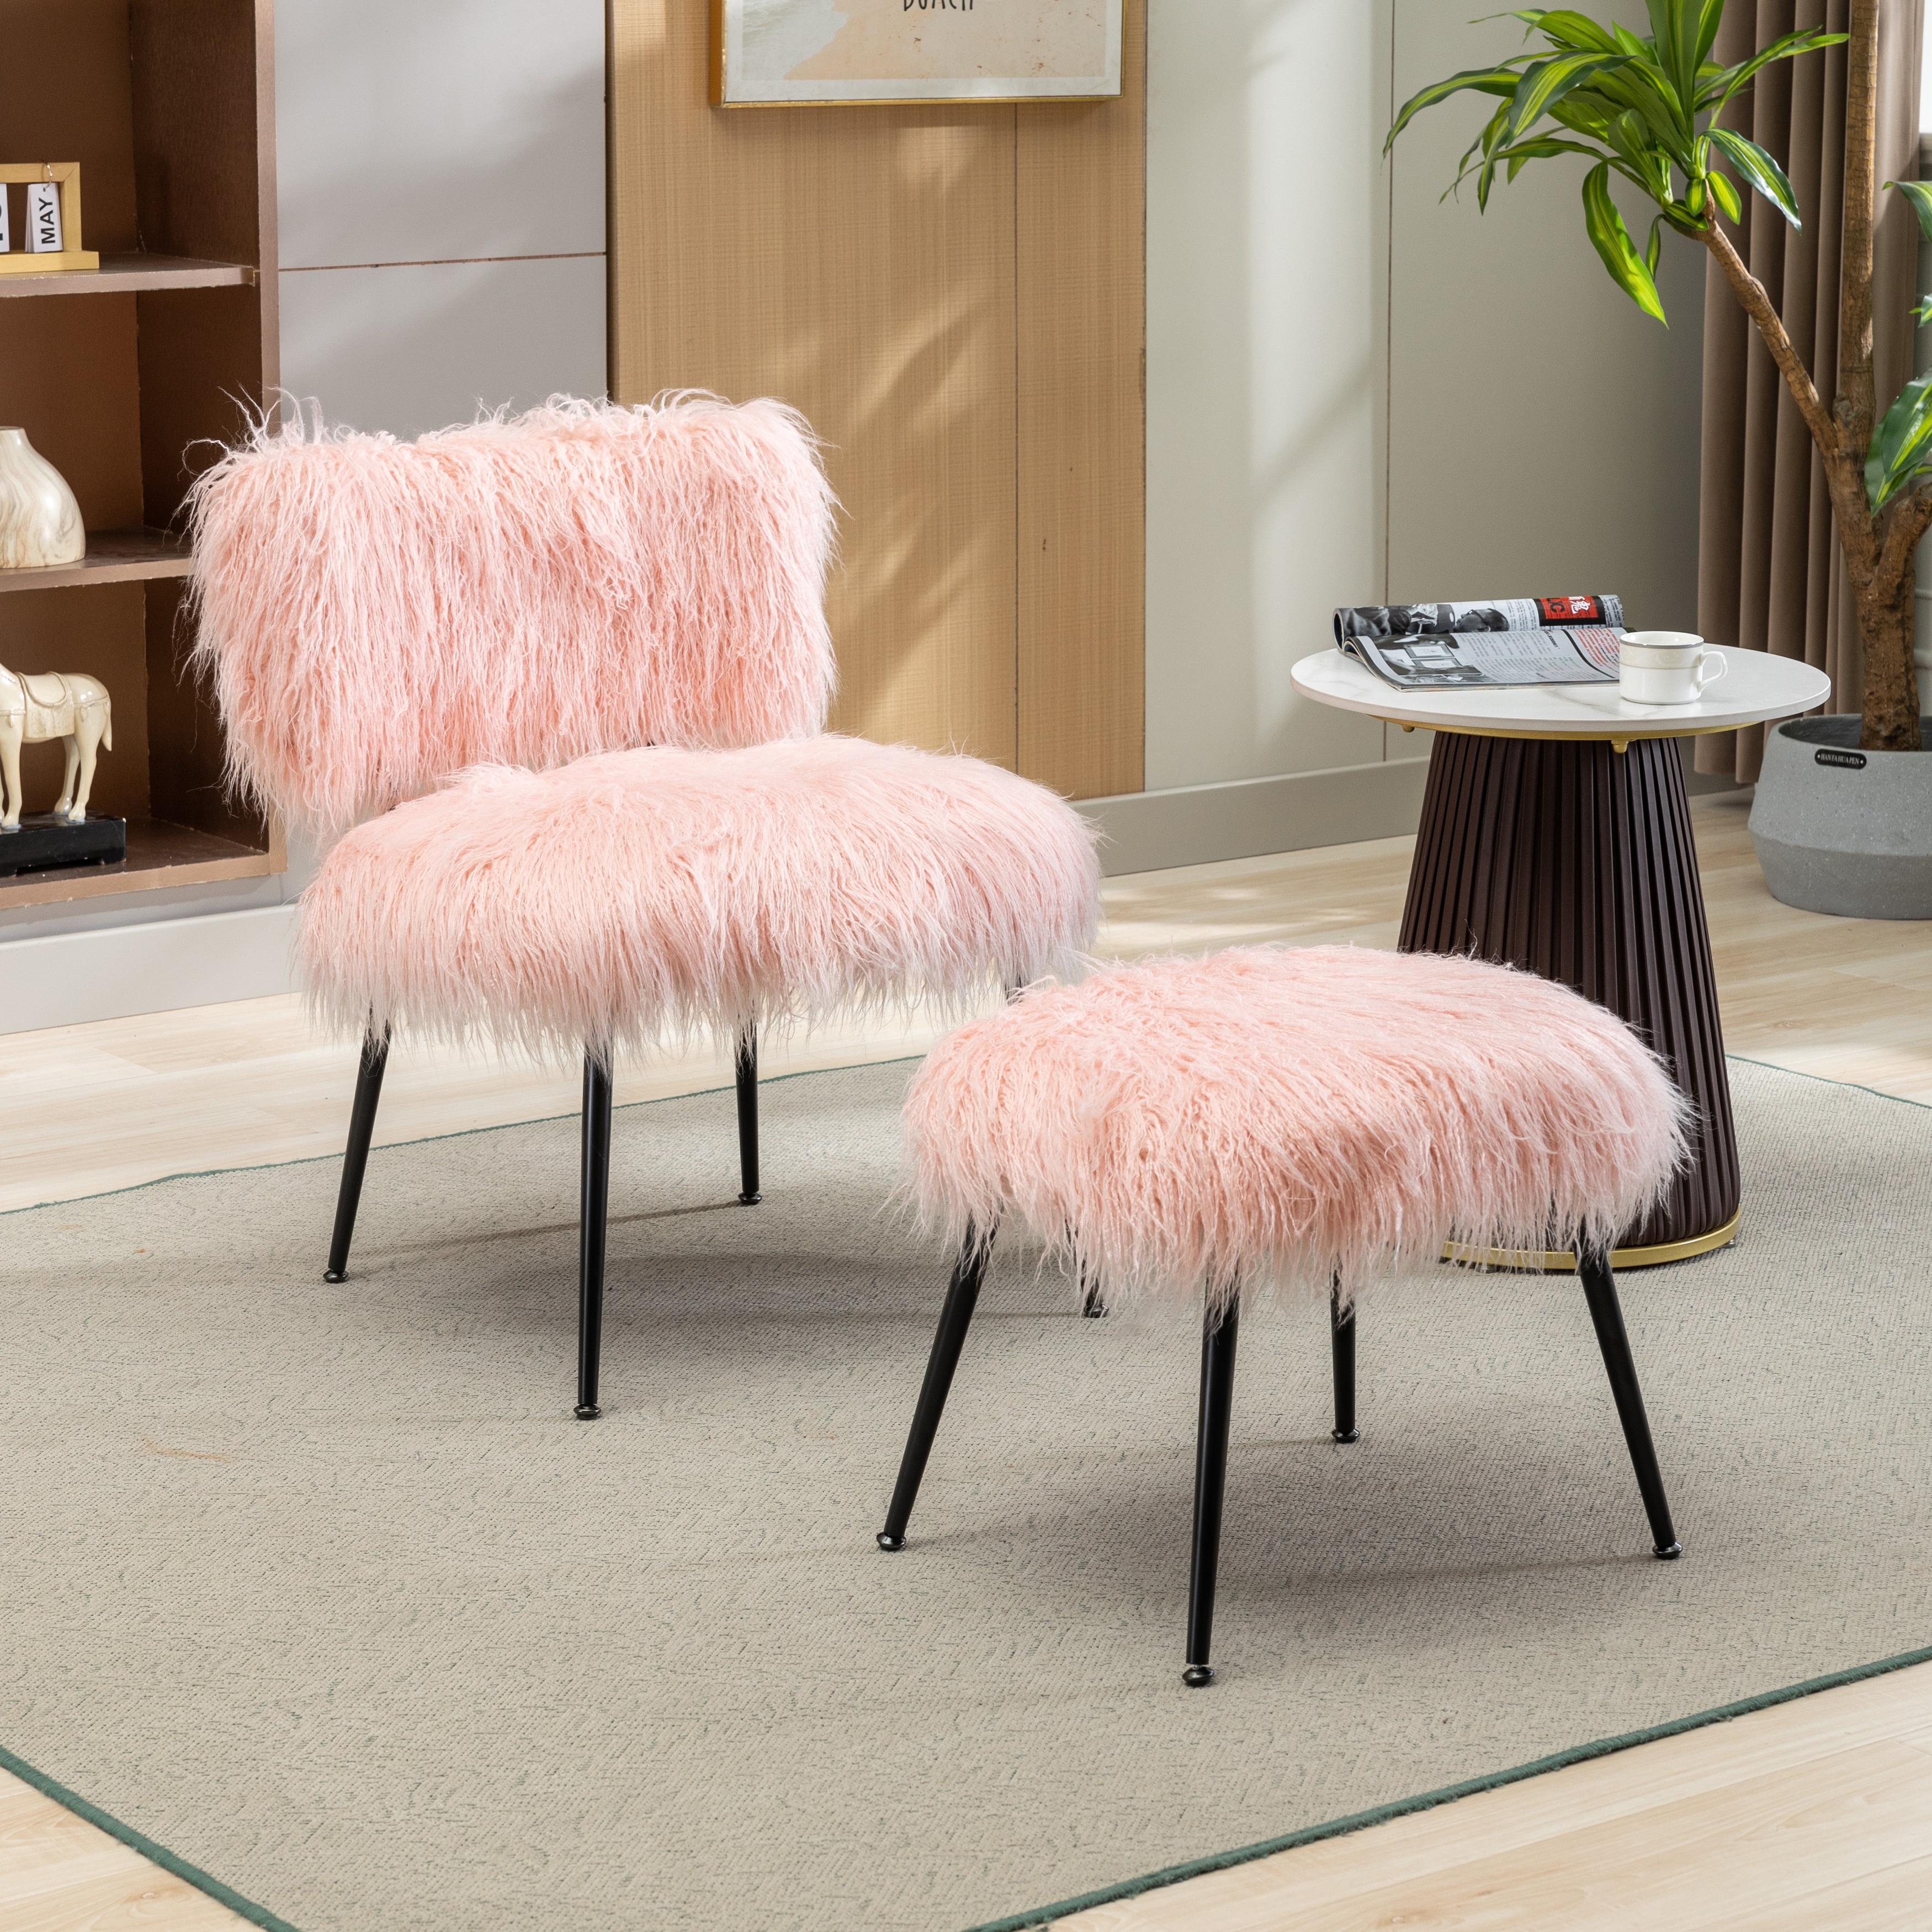 Round Stuffed Pouf Ottoman Faux Fur Ottoman Foot Rest Under Desk Foot Stool  Great for Living